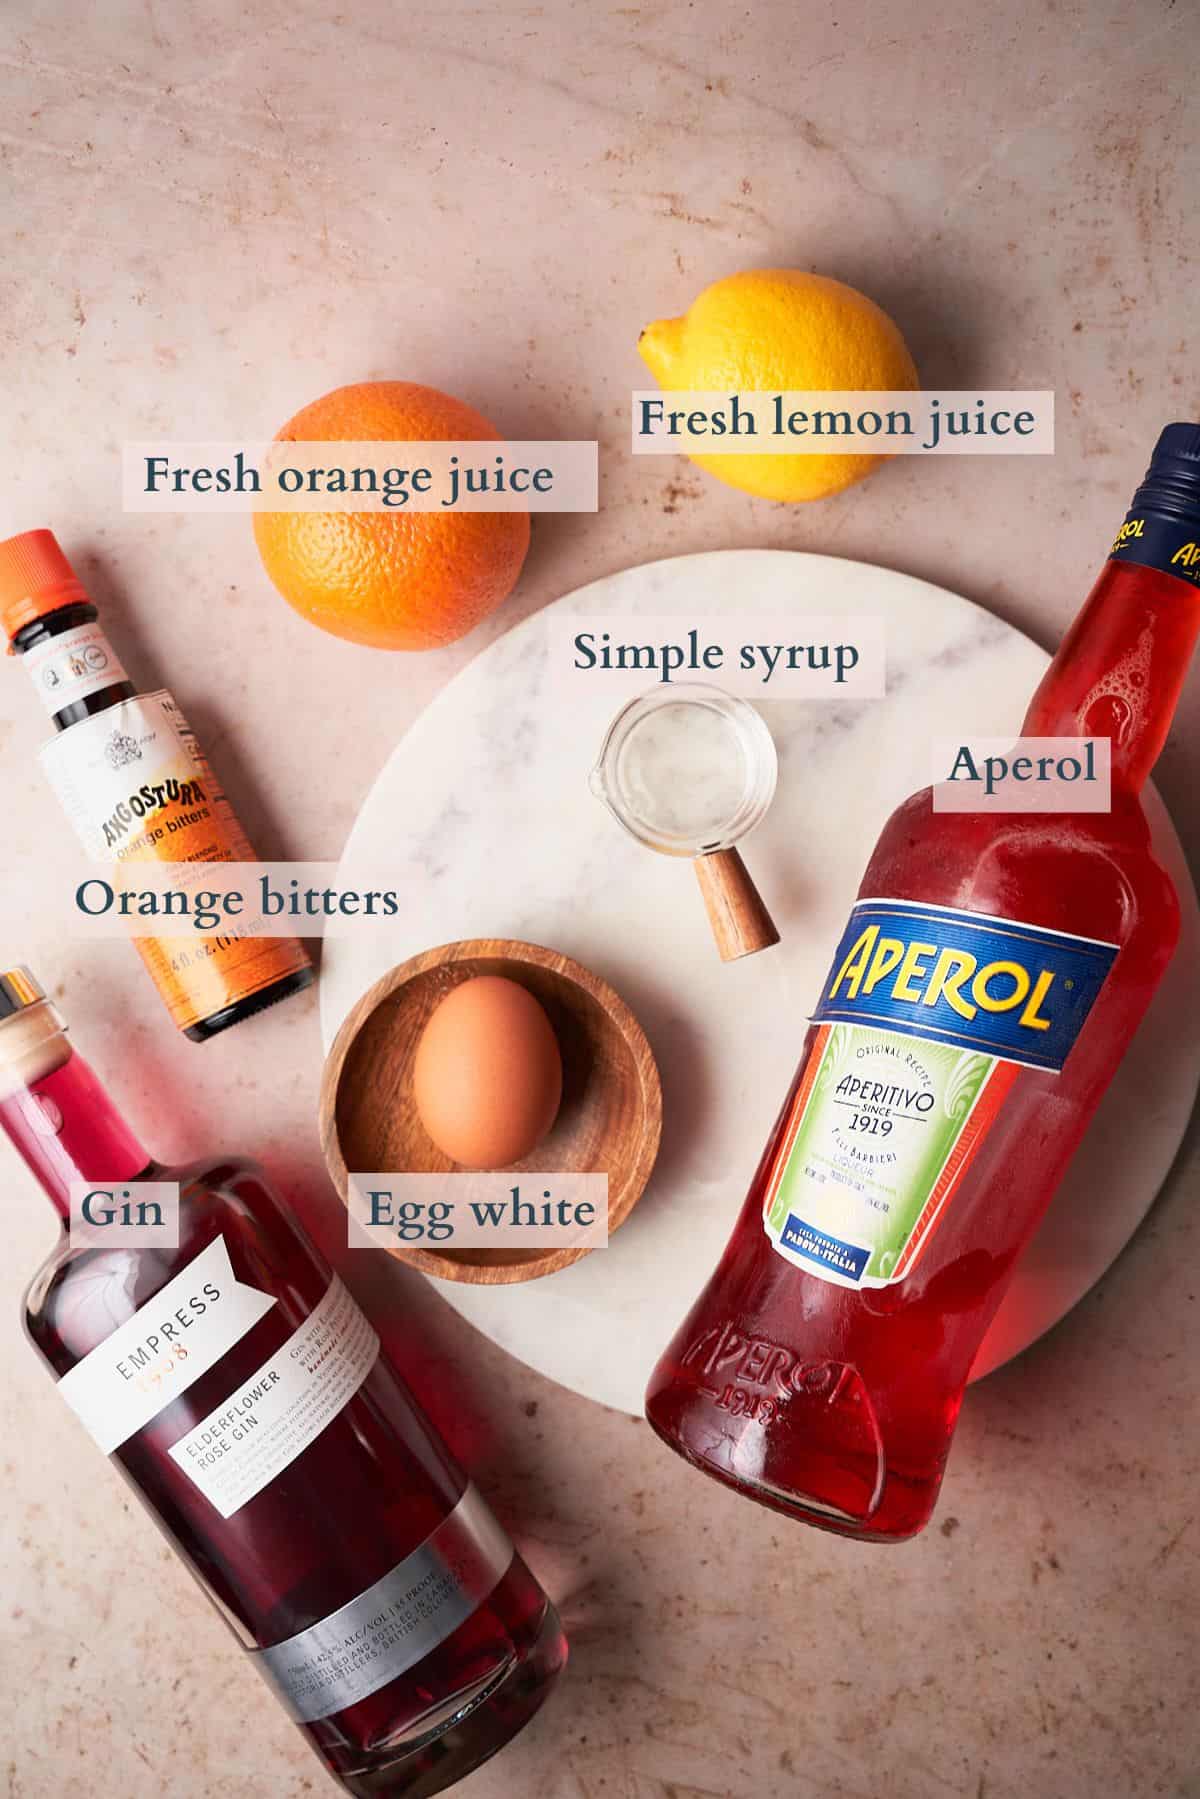 ingredients to make an aperol sour laid out on a table and labeled to denote each ingredient.